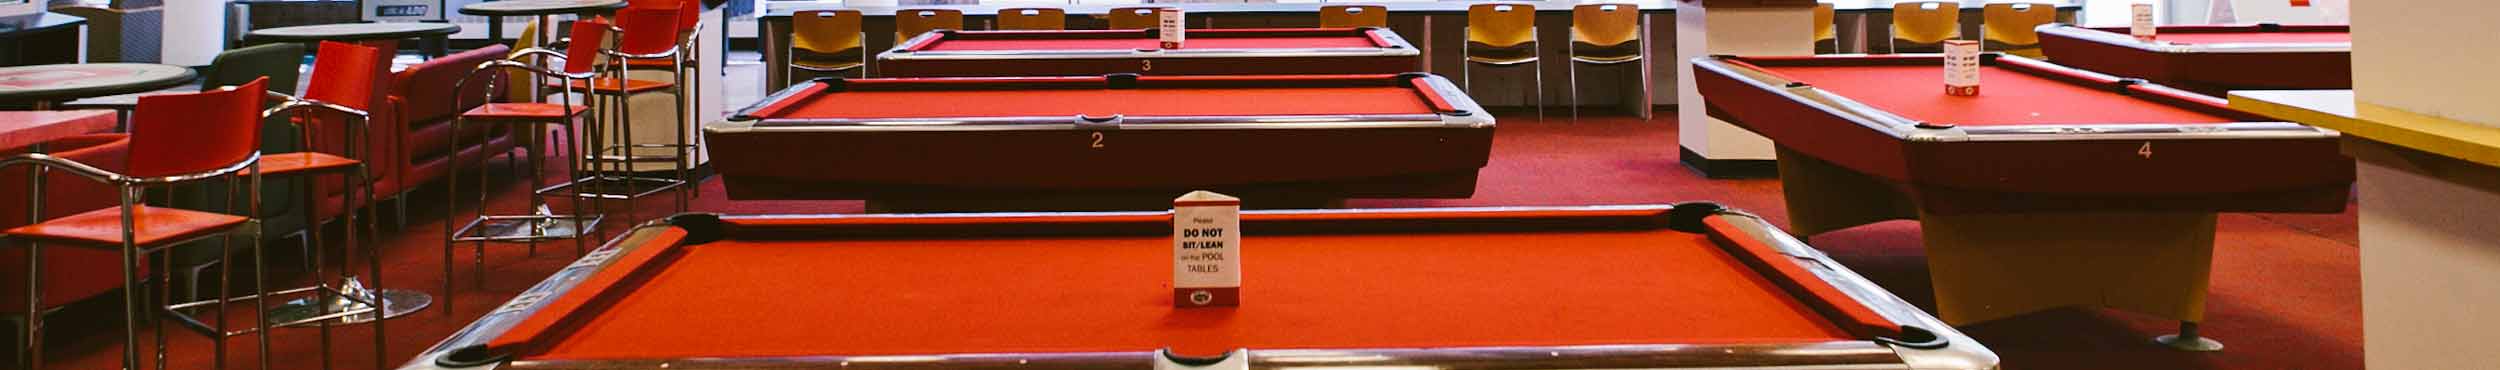 A photo of the Union billiards tables.